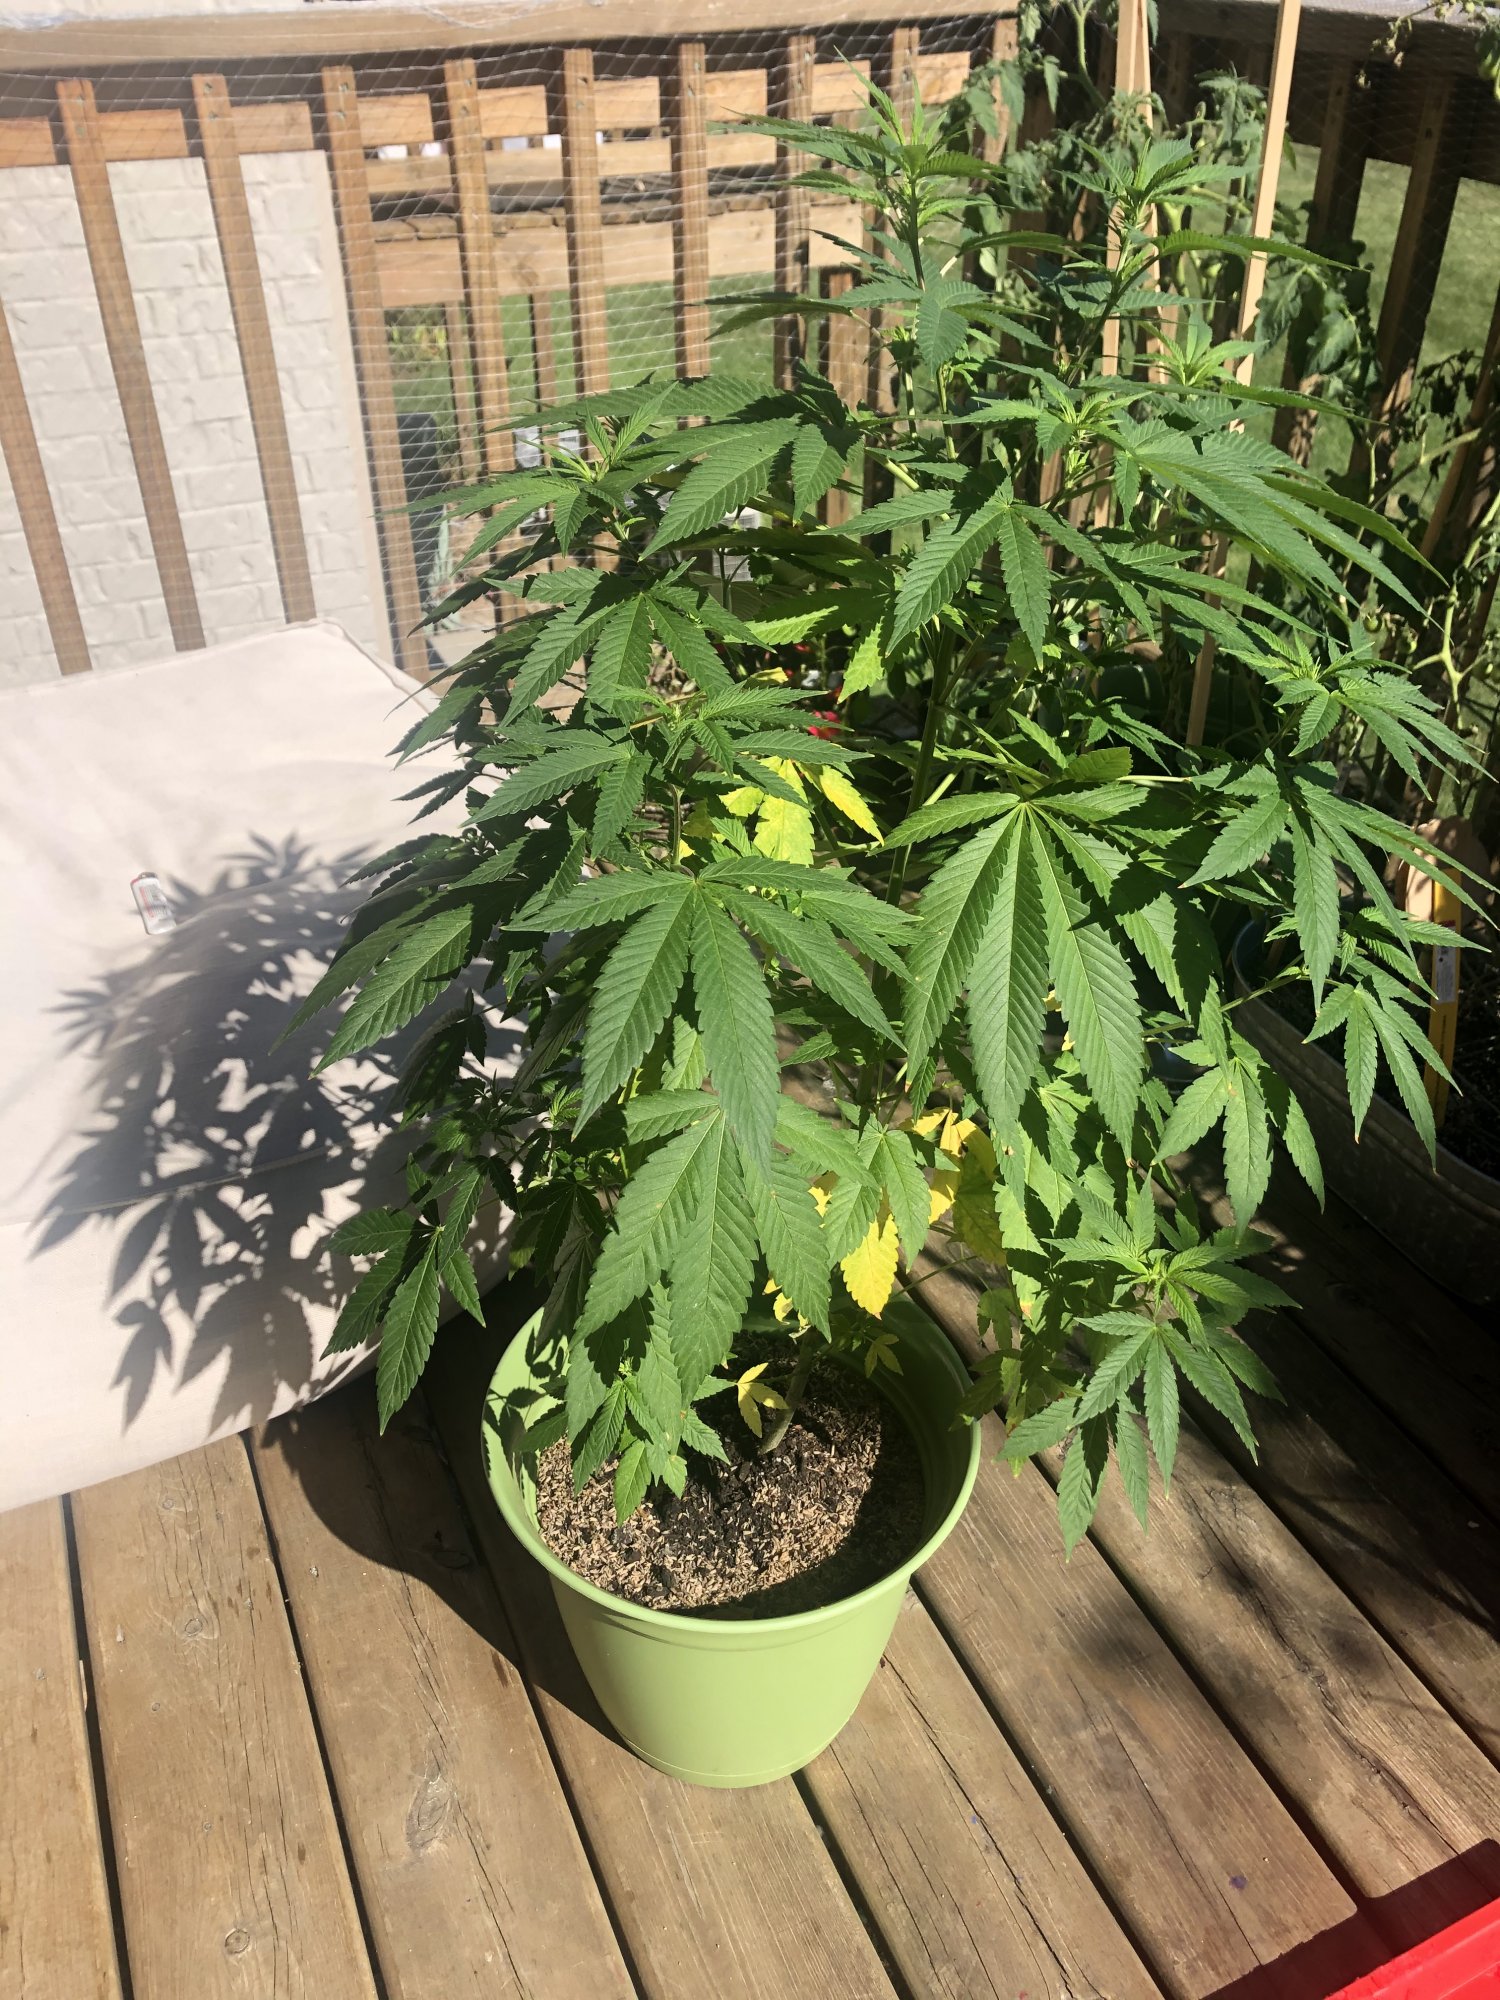 Yellowing leaves on my outdoor plant